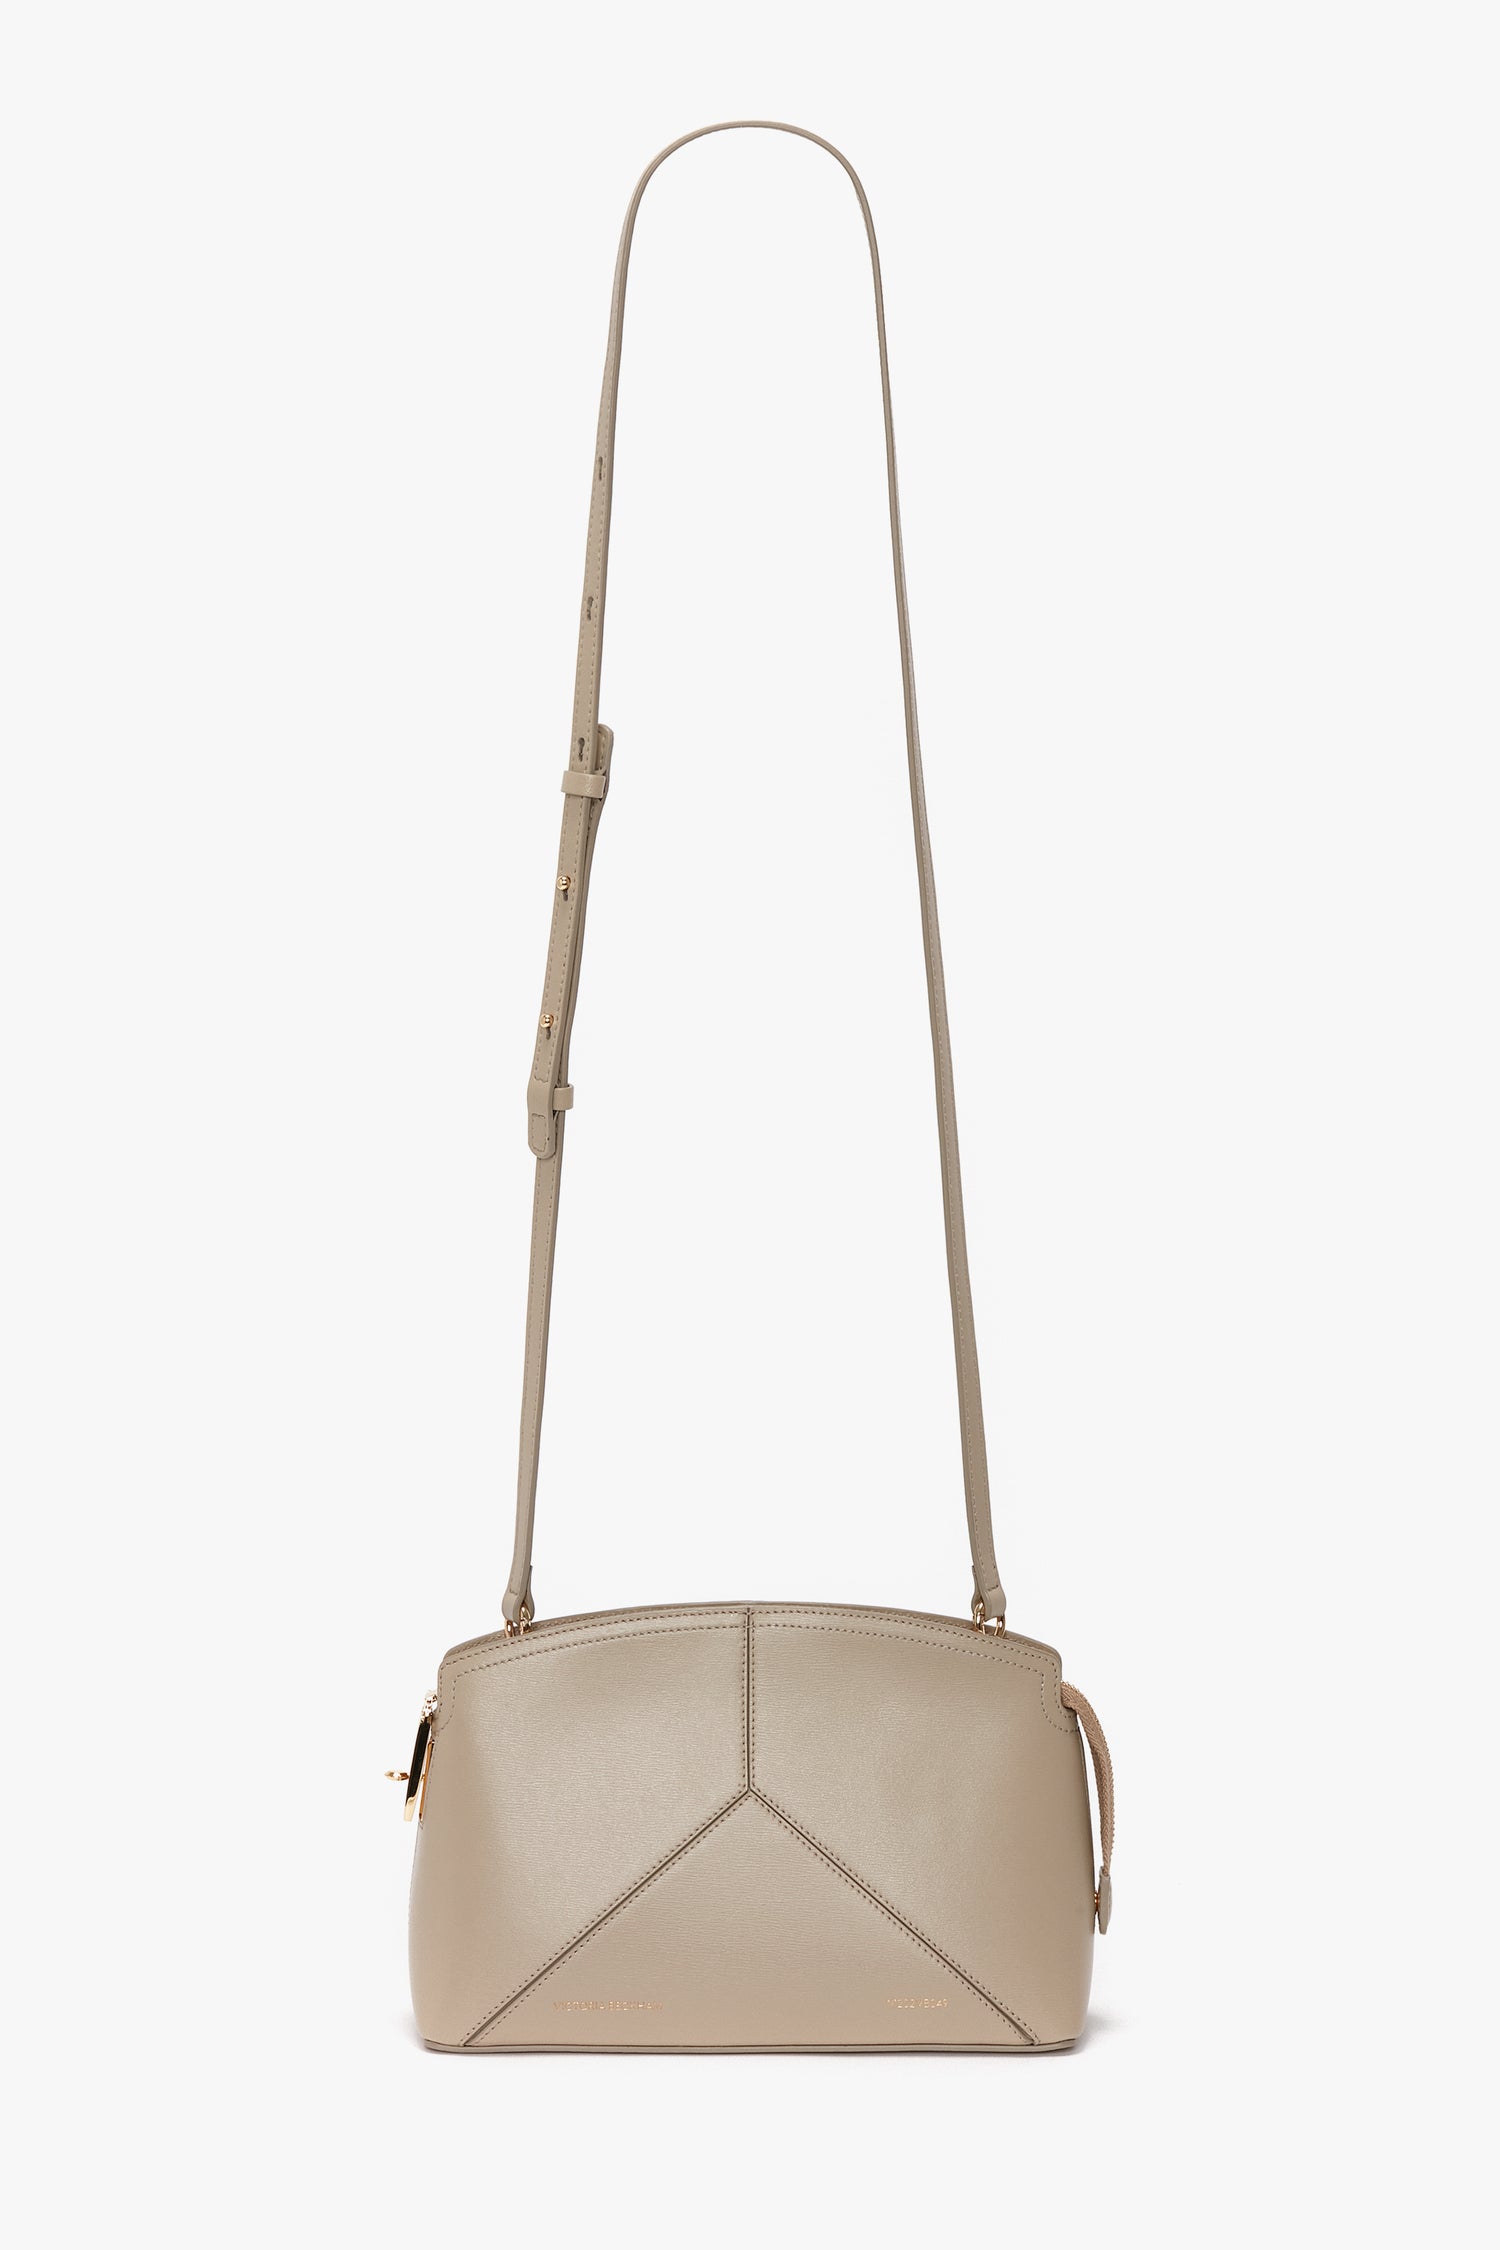 The Victoria Beckham Victoria Crossbody Bag In Taupe Leather, with a structured design, features a long adjustable strap, simple geometric stitching on the front, and gold-toned hardware. Inspired by Victoria Beckham's elegant style.